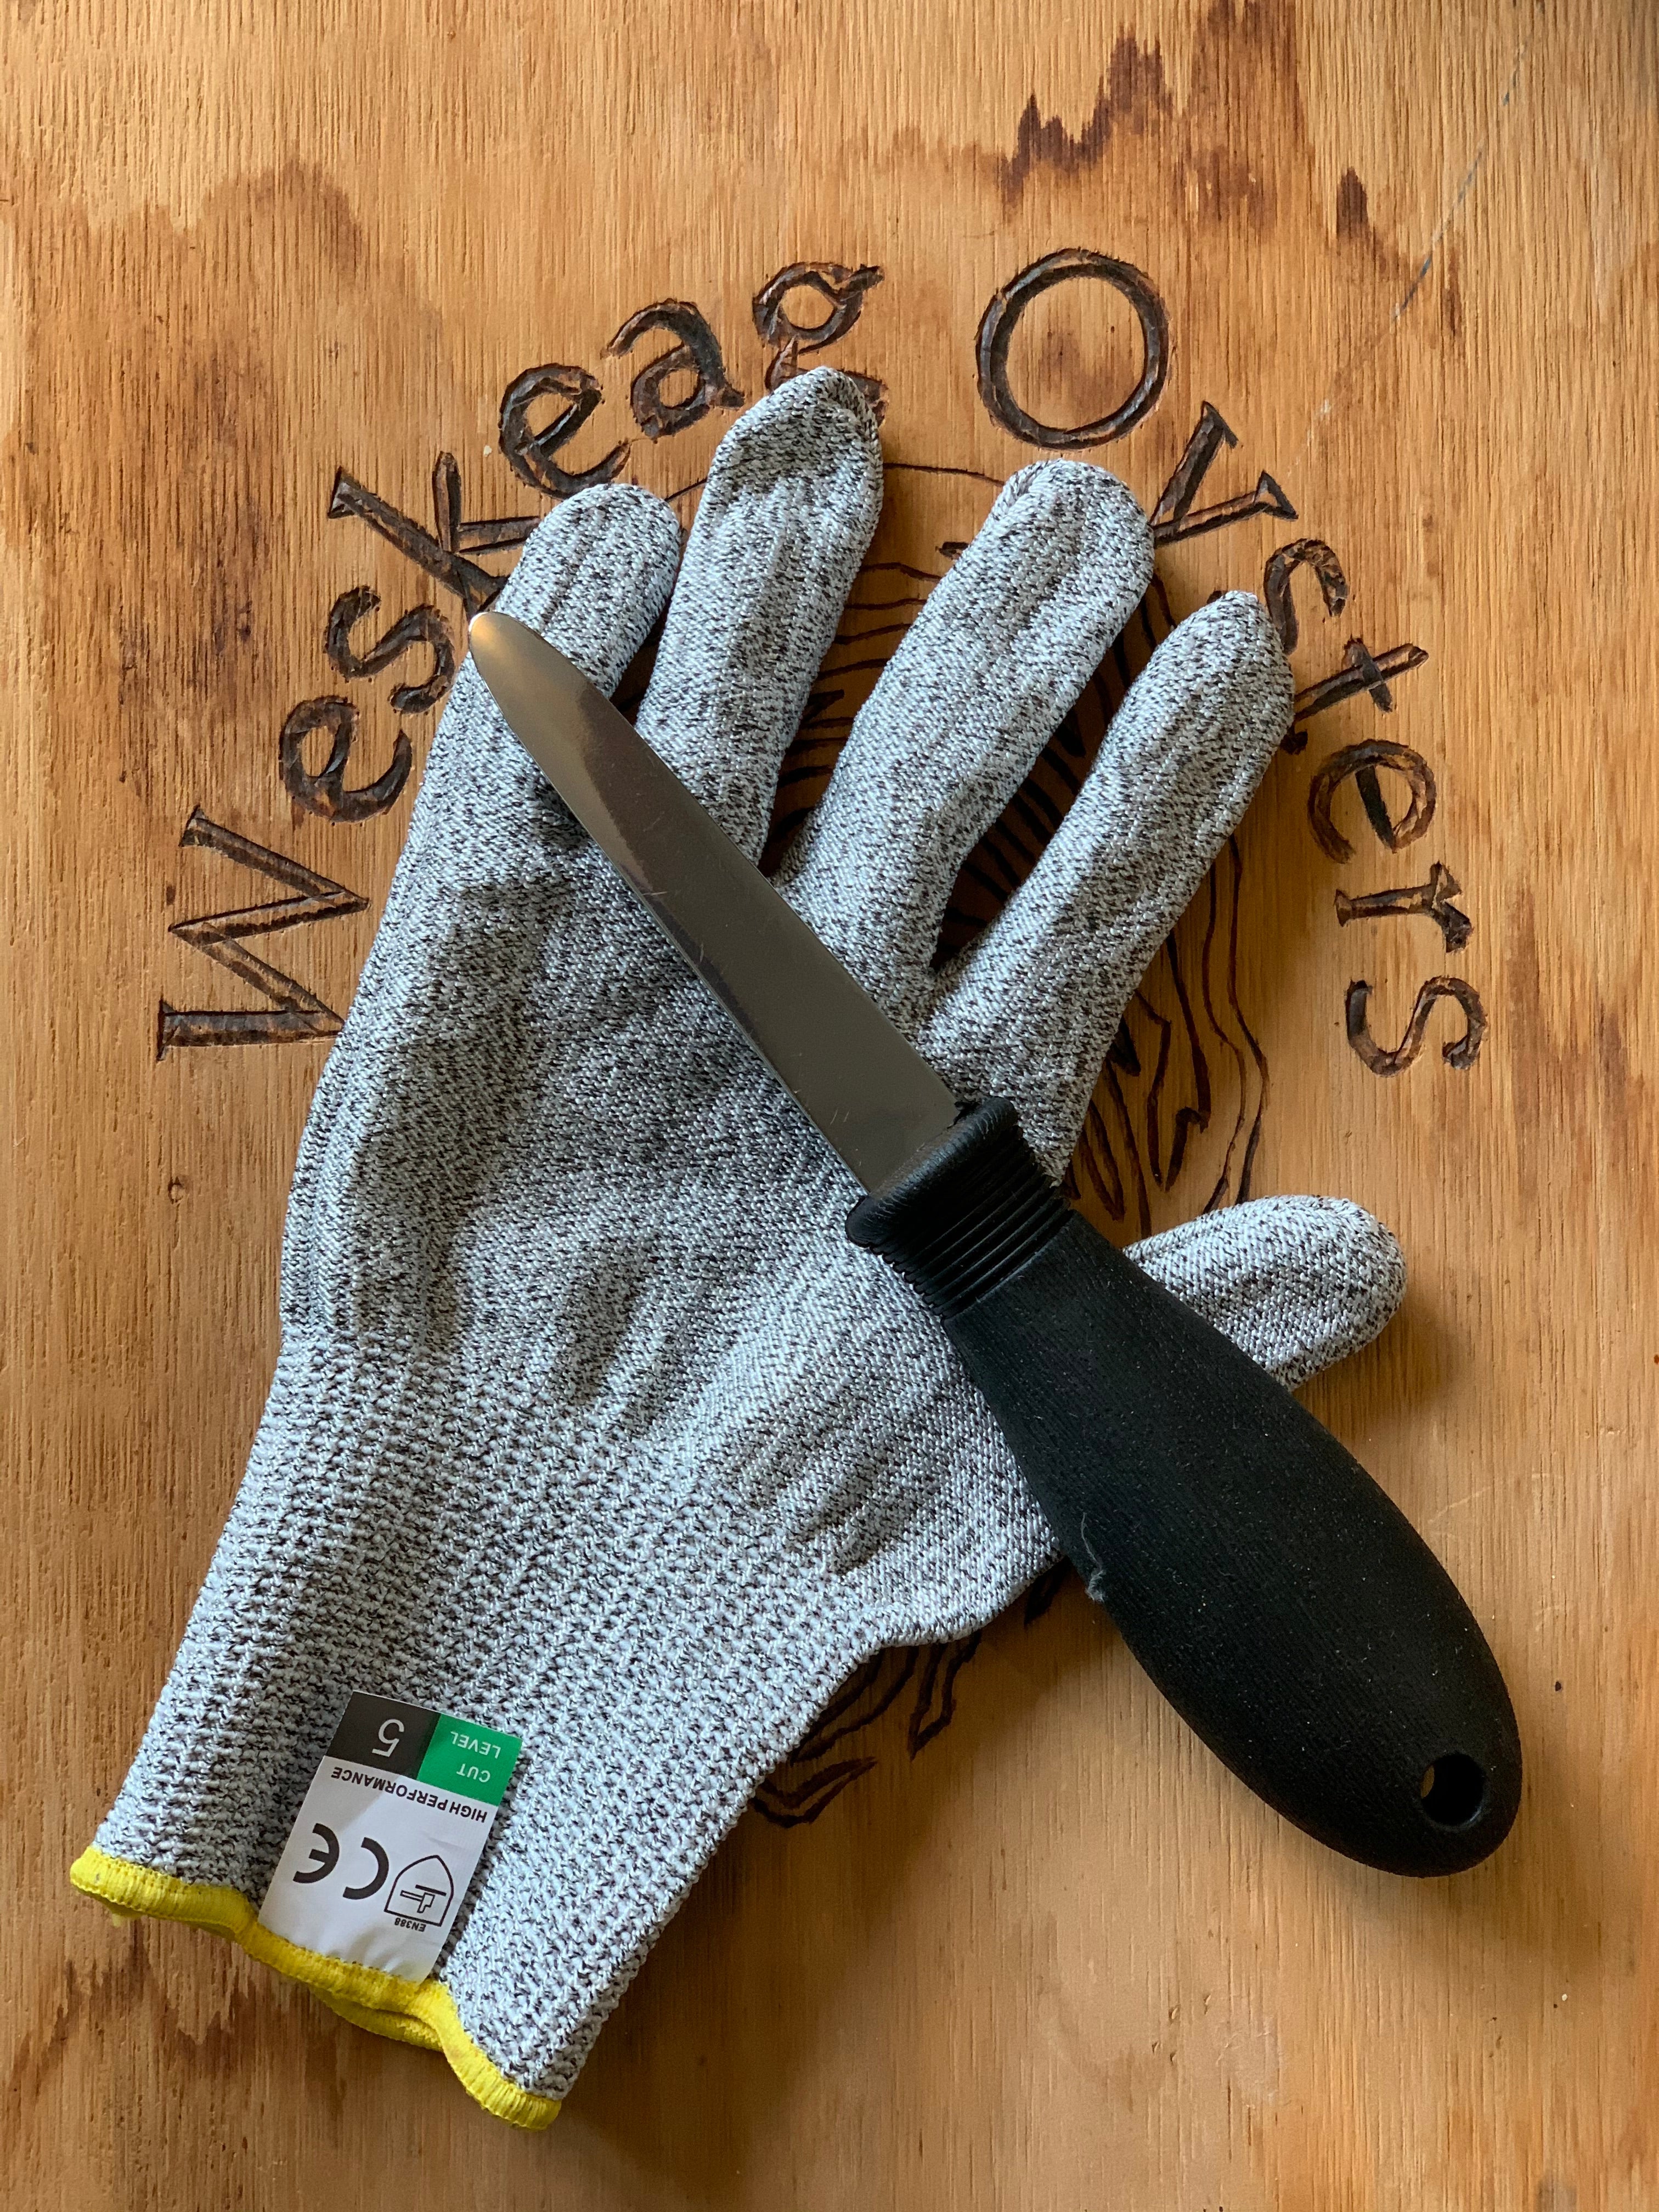 Charleston Shucker Company - Cut Resistant Shucking Gloves – An Initial  Impression